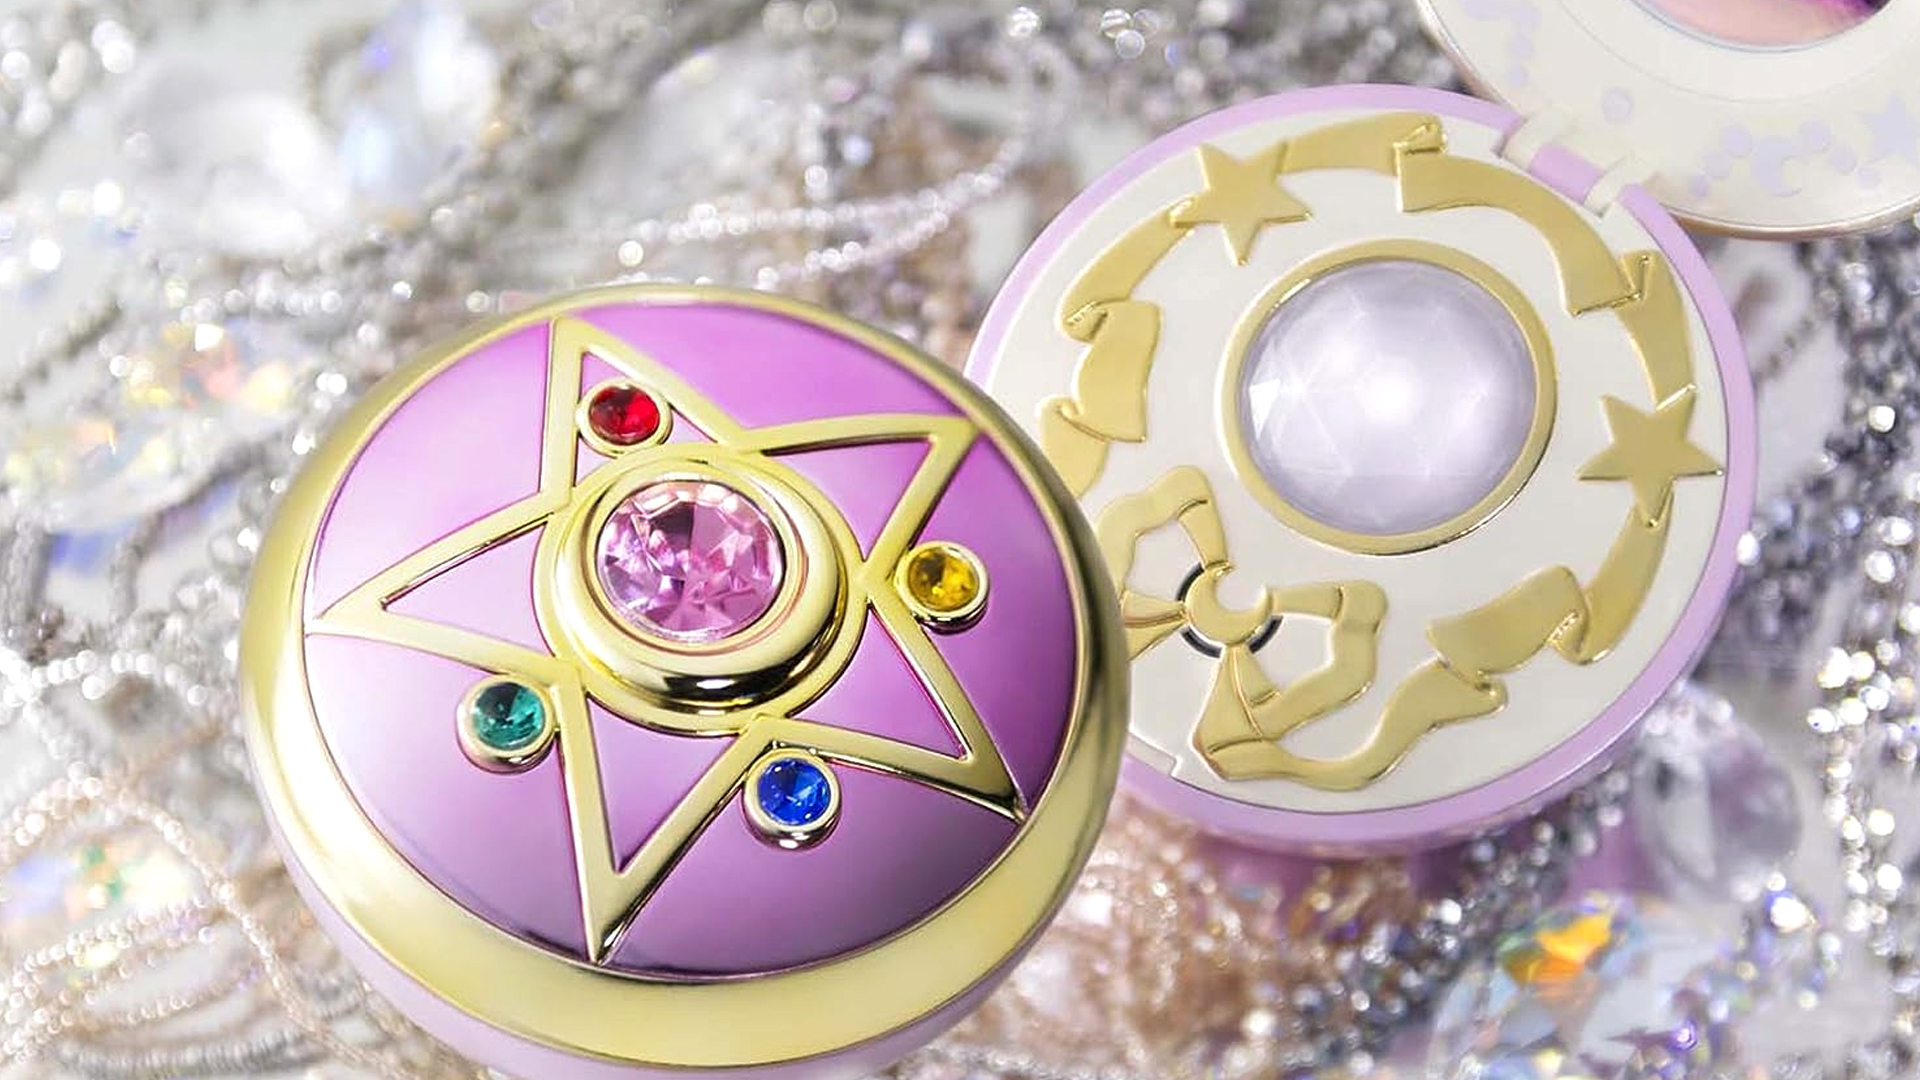 Two Sailor Moon Tamashii Nations Crystal Star Compact Proplica next to each other with one open and loads of crystals and jewelery behind them.